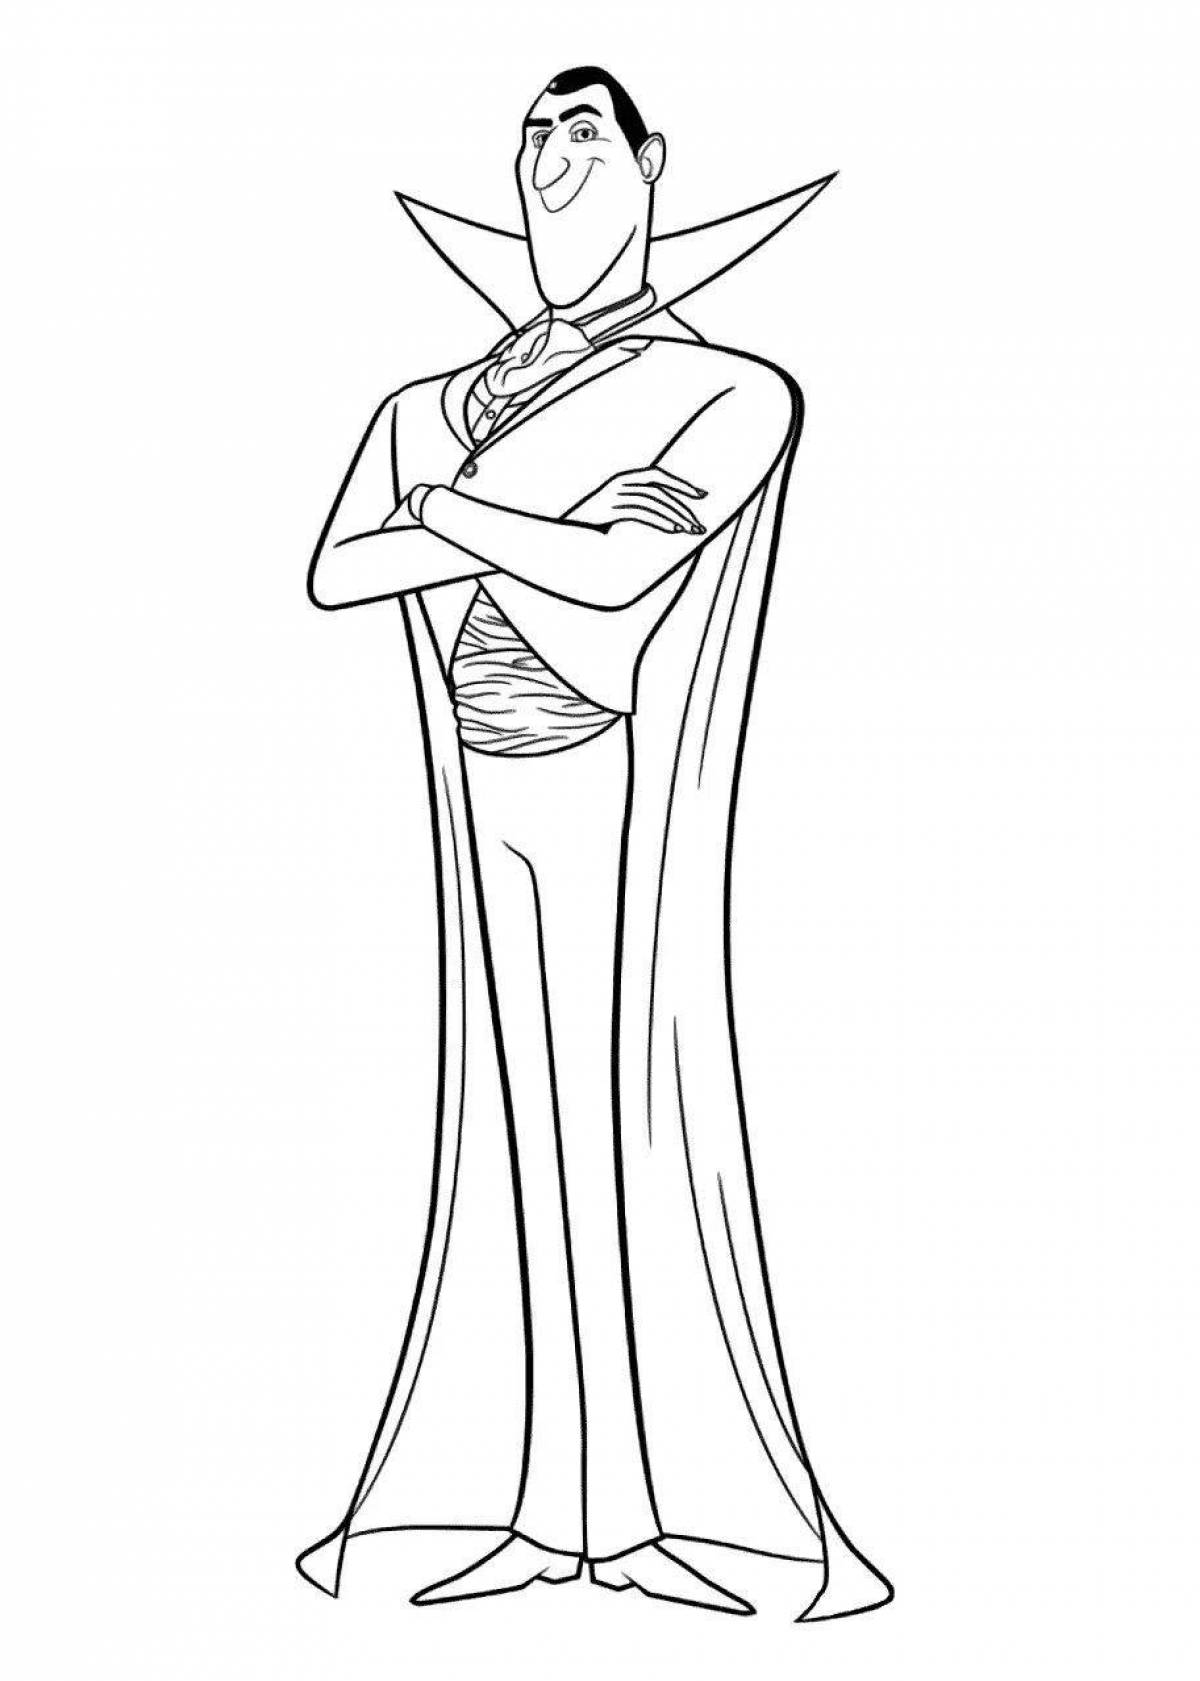 Frightening dracula coloring page